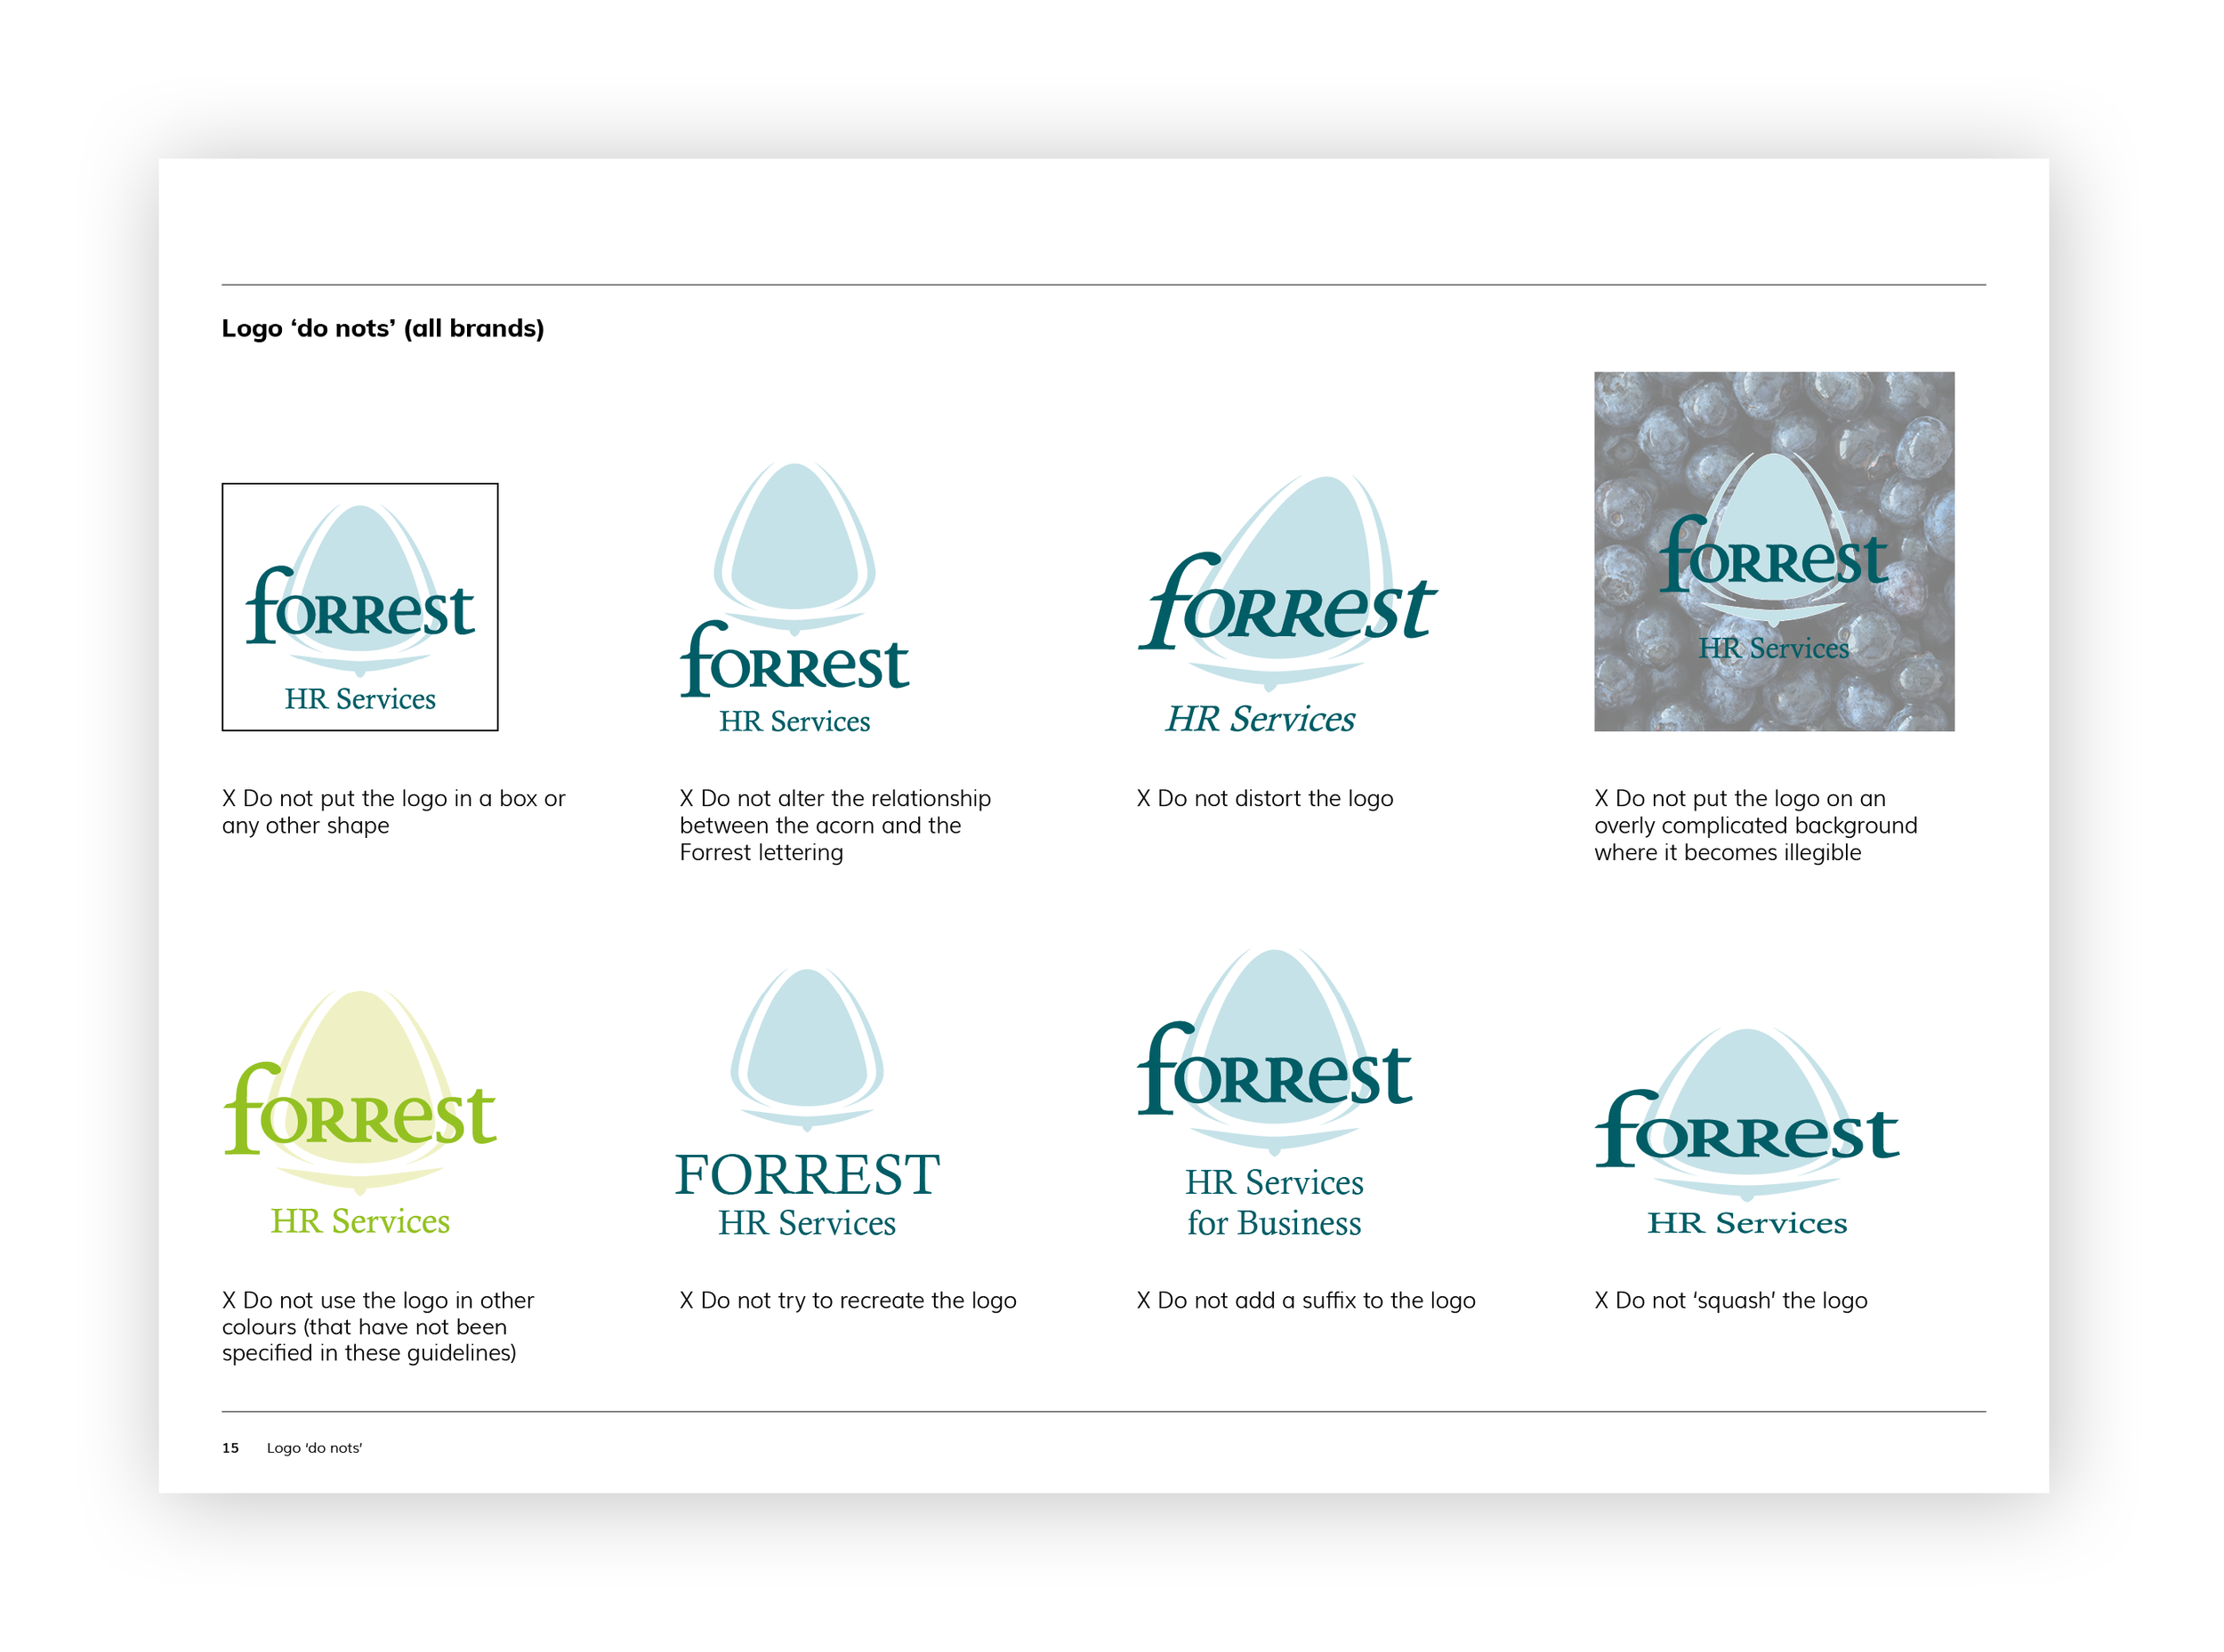 Forrest-Group-brand guidelines_3.png